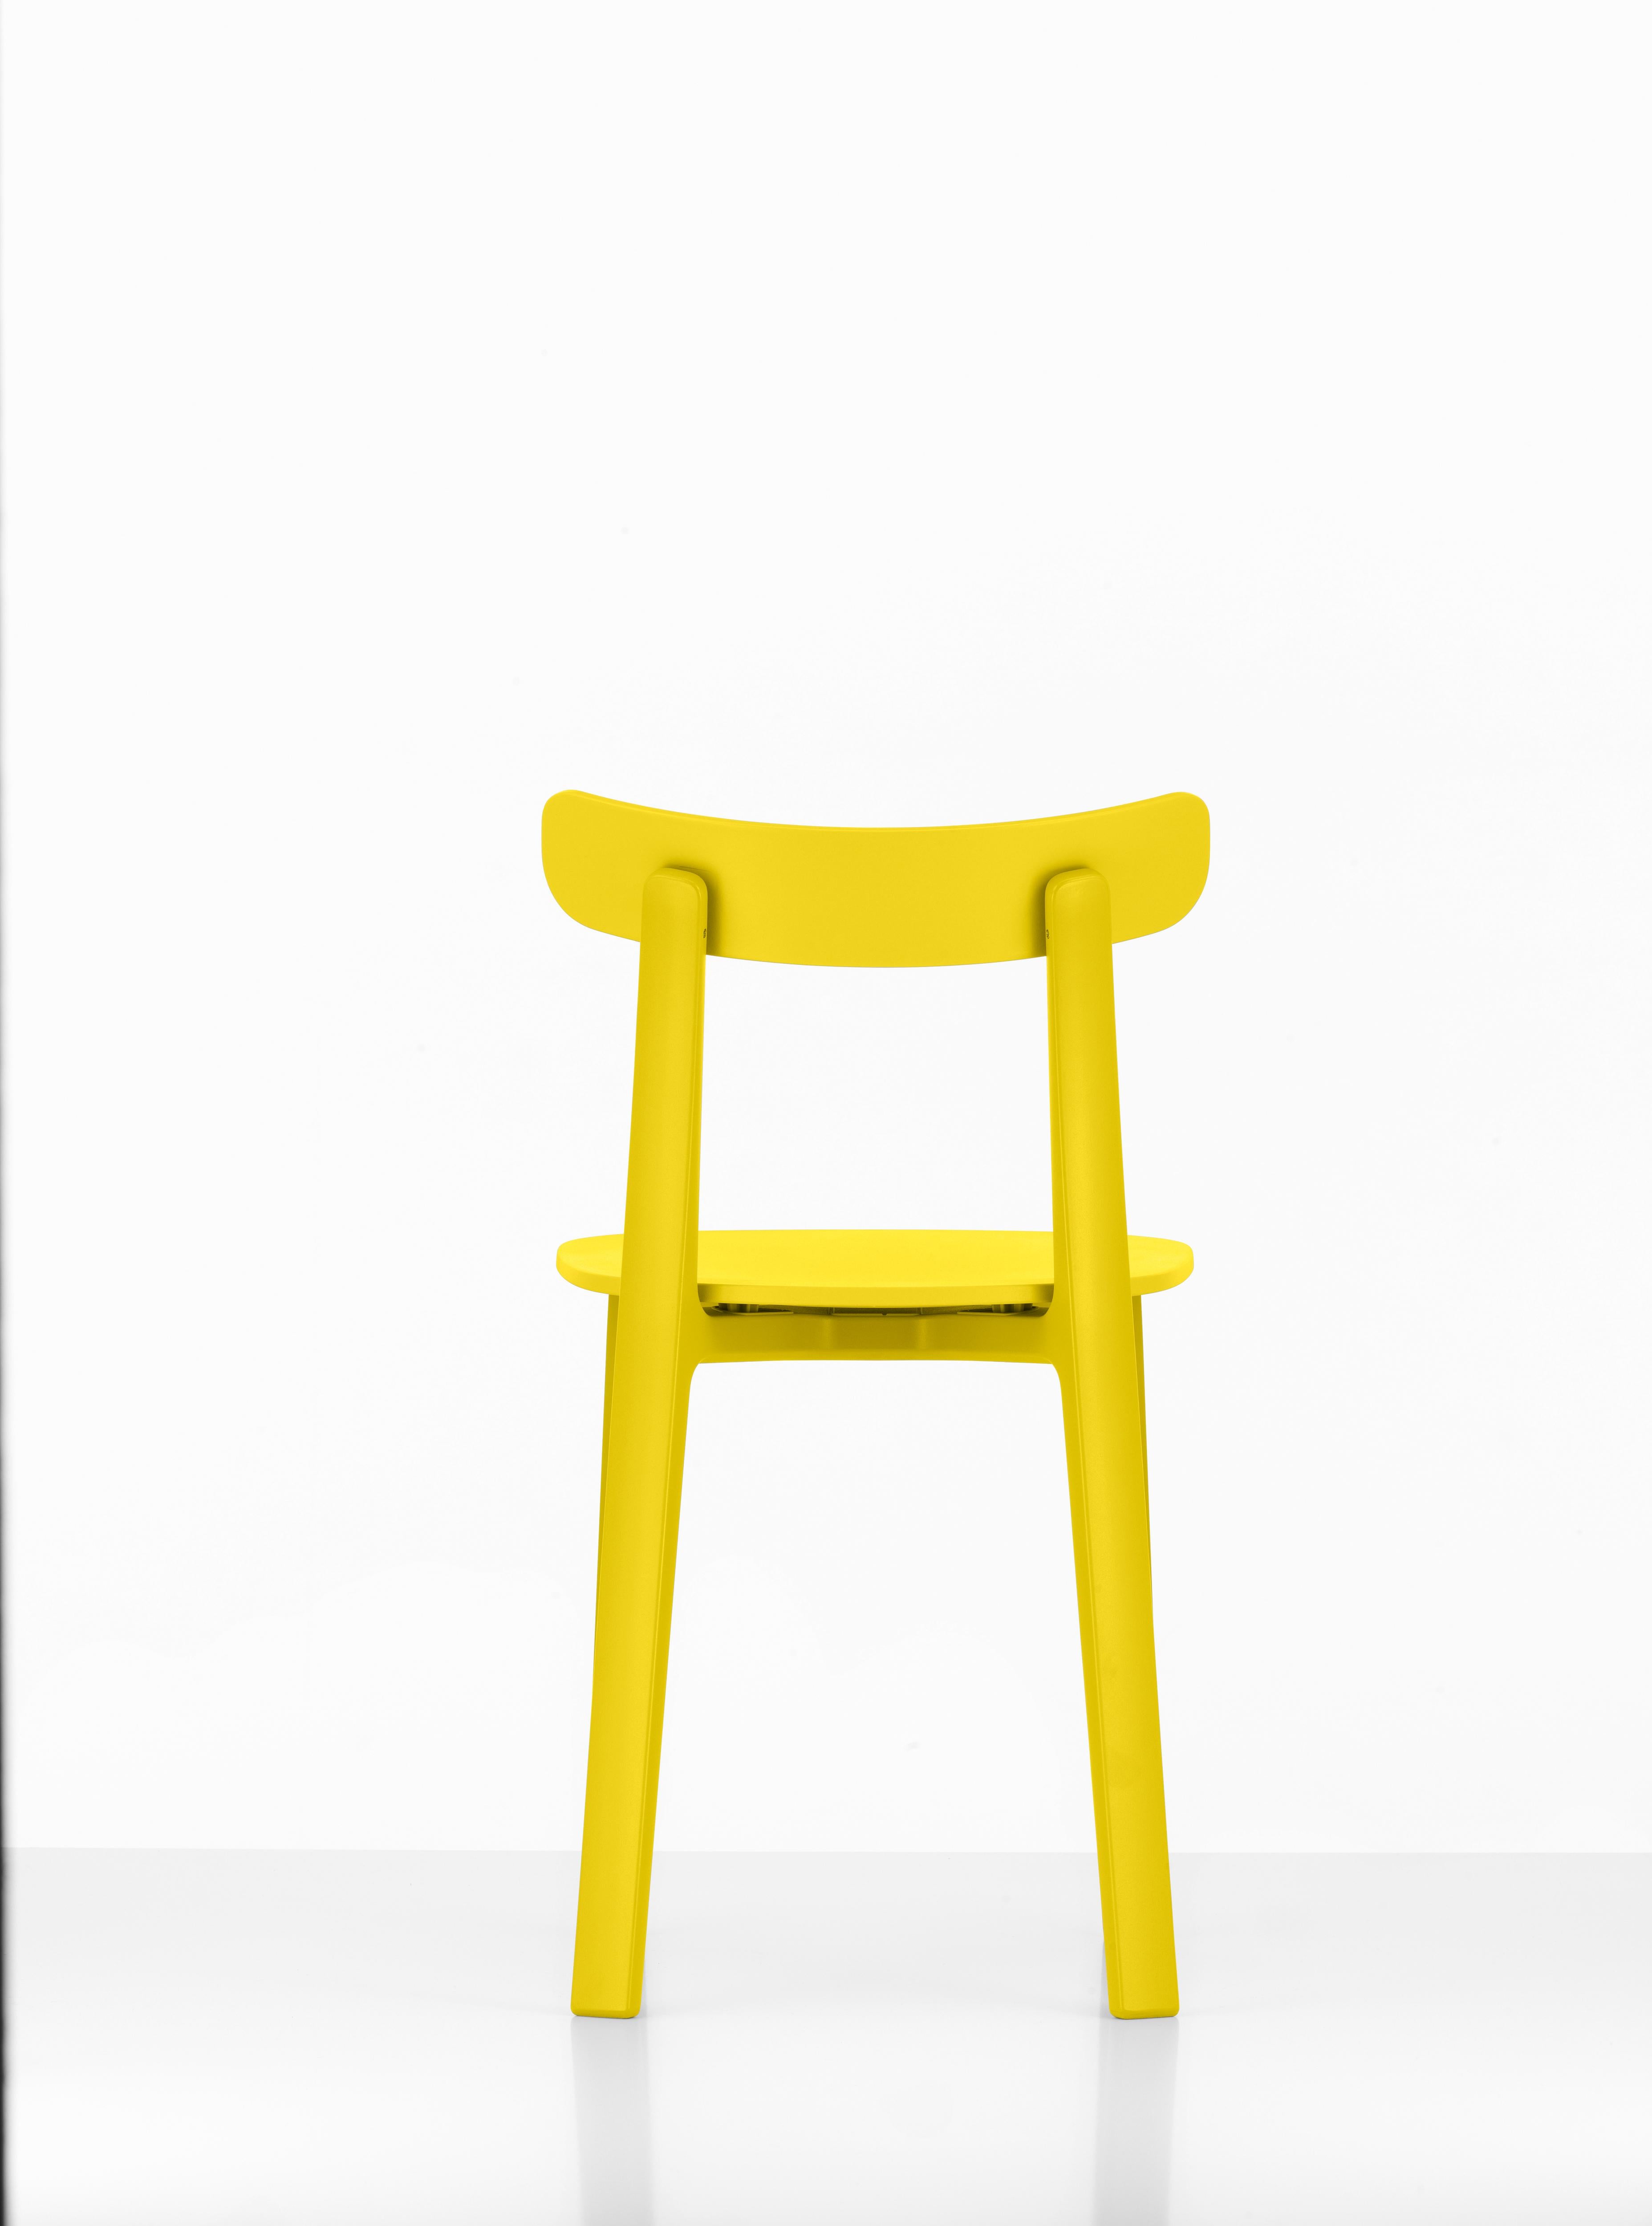 Vitra All Plastic Chair in Buttercup Two Tone by Jasper Morrison im Zustand „Neu“ im Angebot in New York, NY